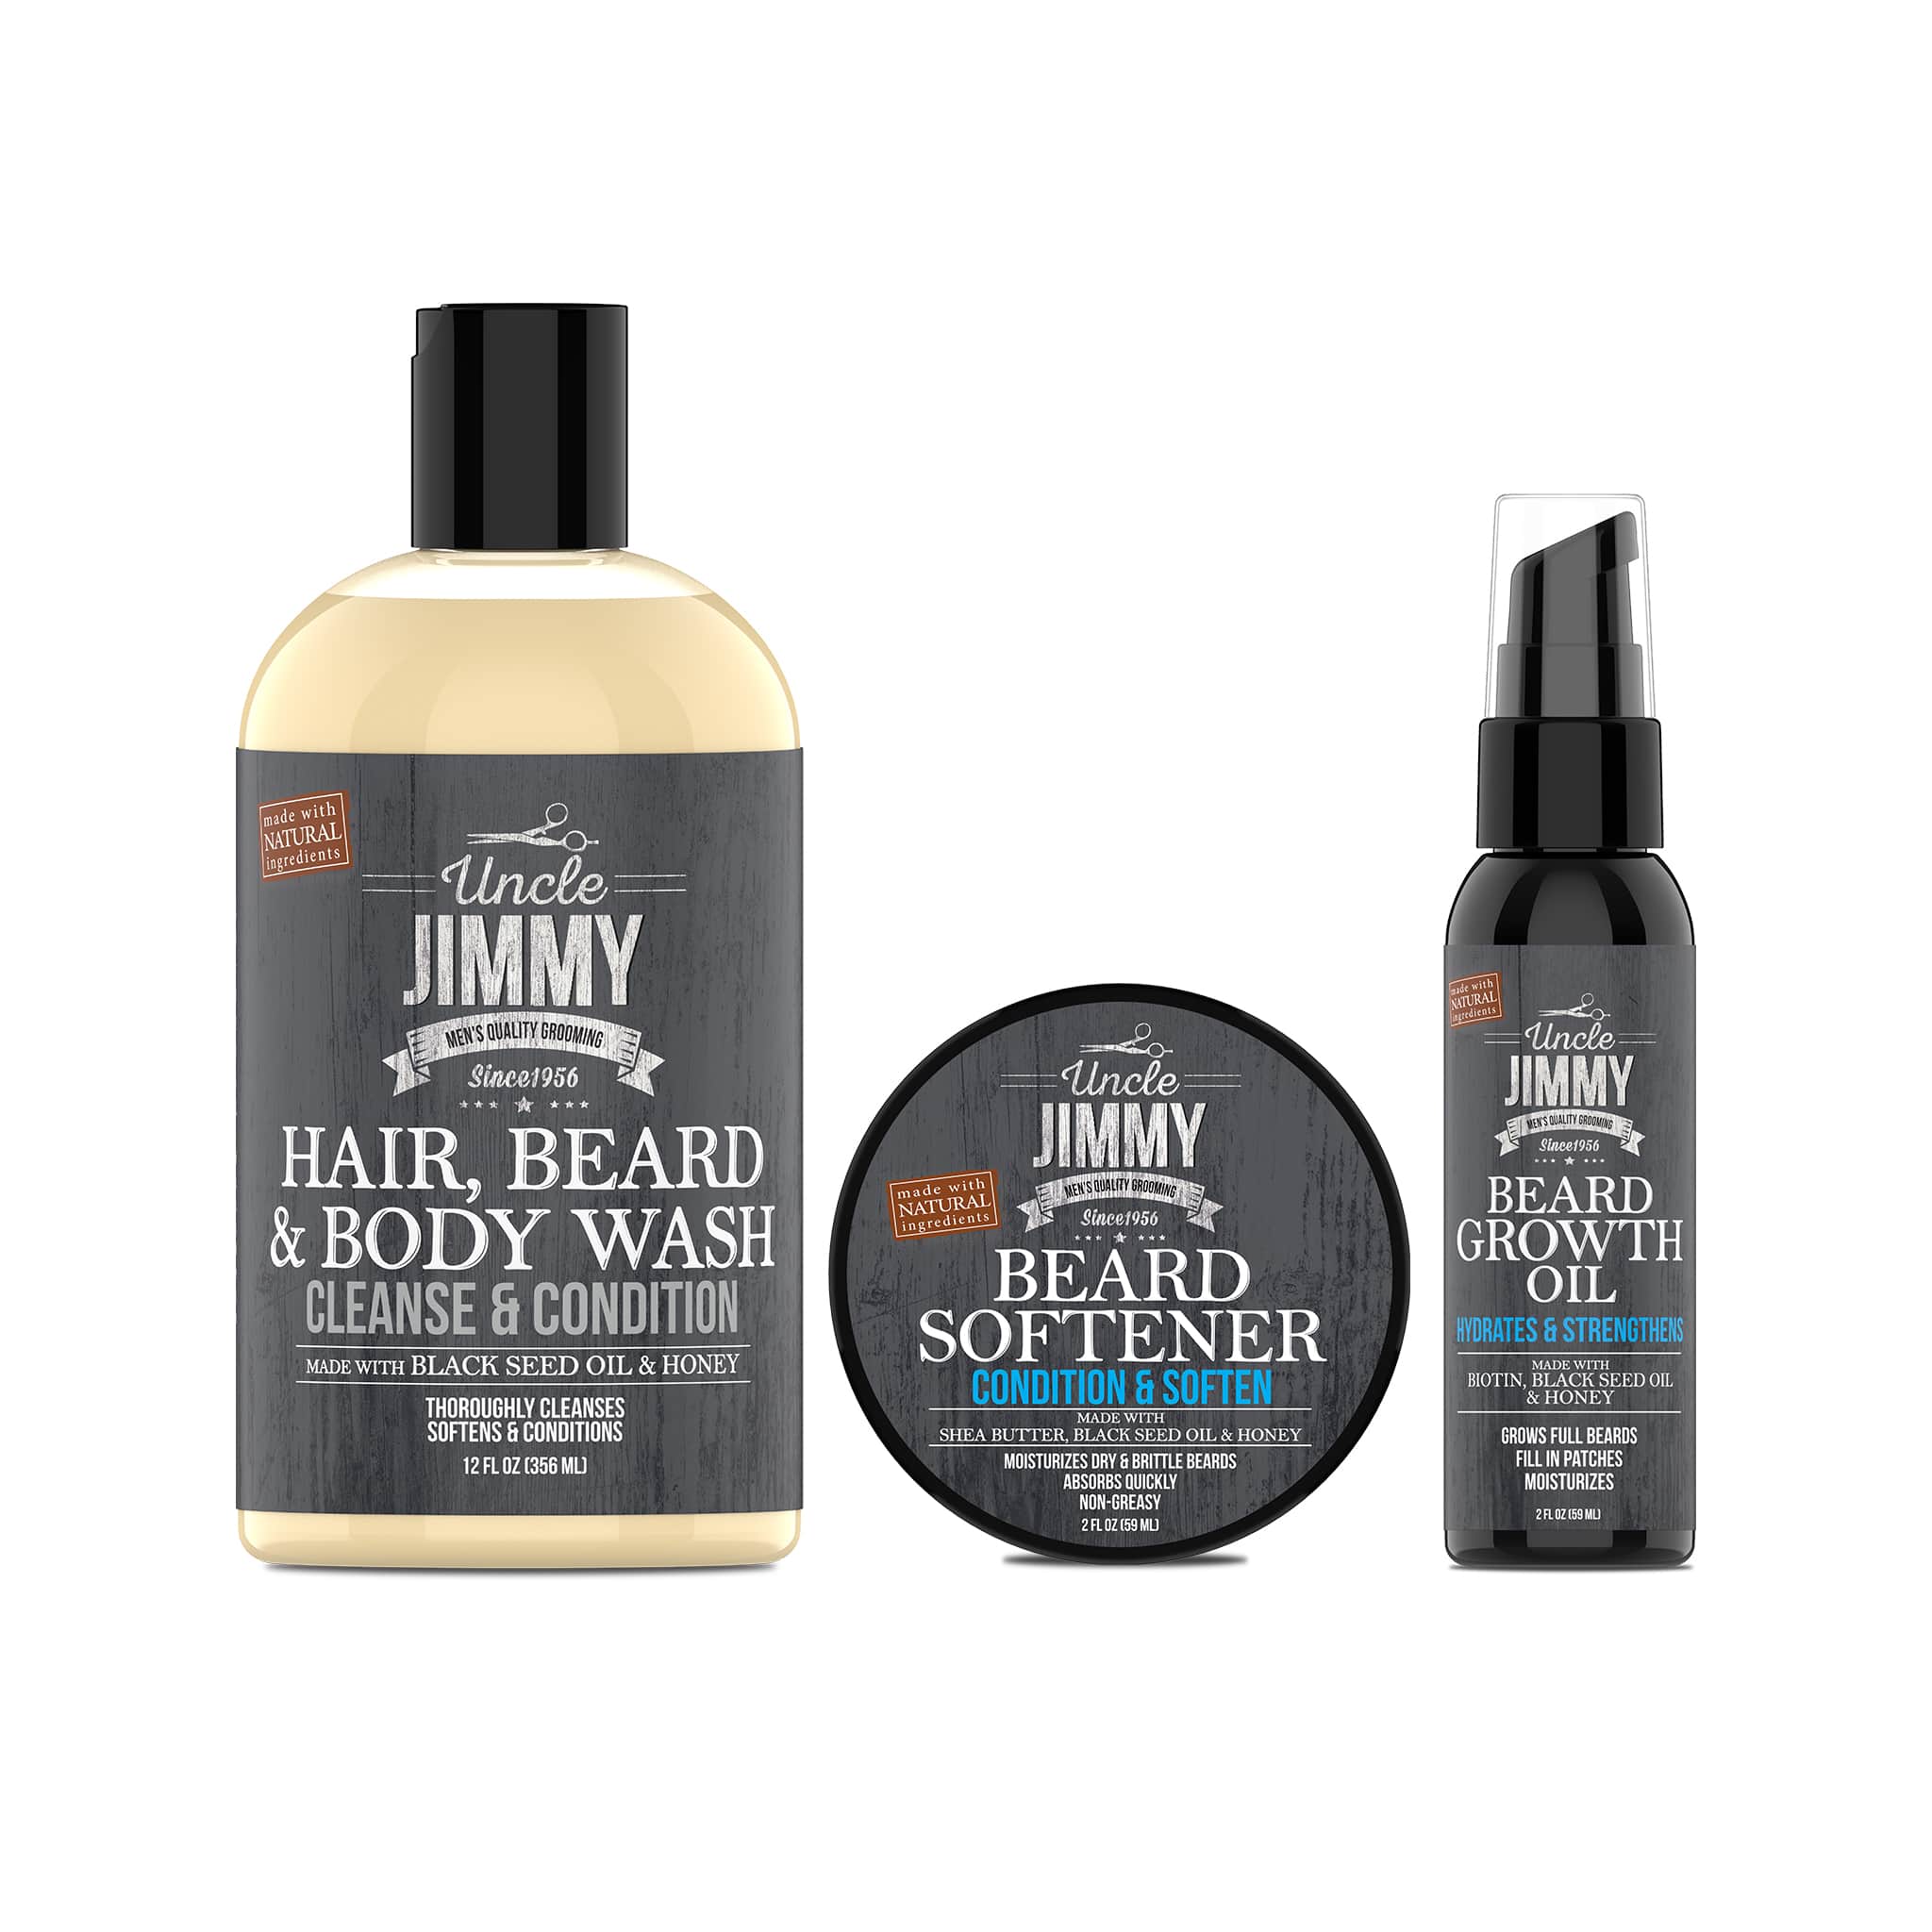 Beard Care - Men's Grooming - #1 Rated Beard Products